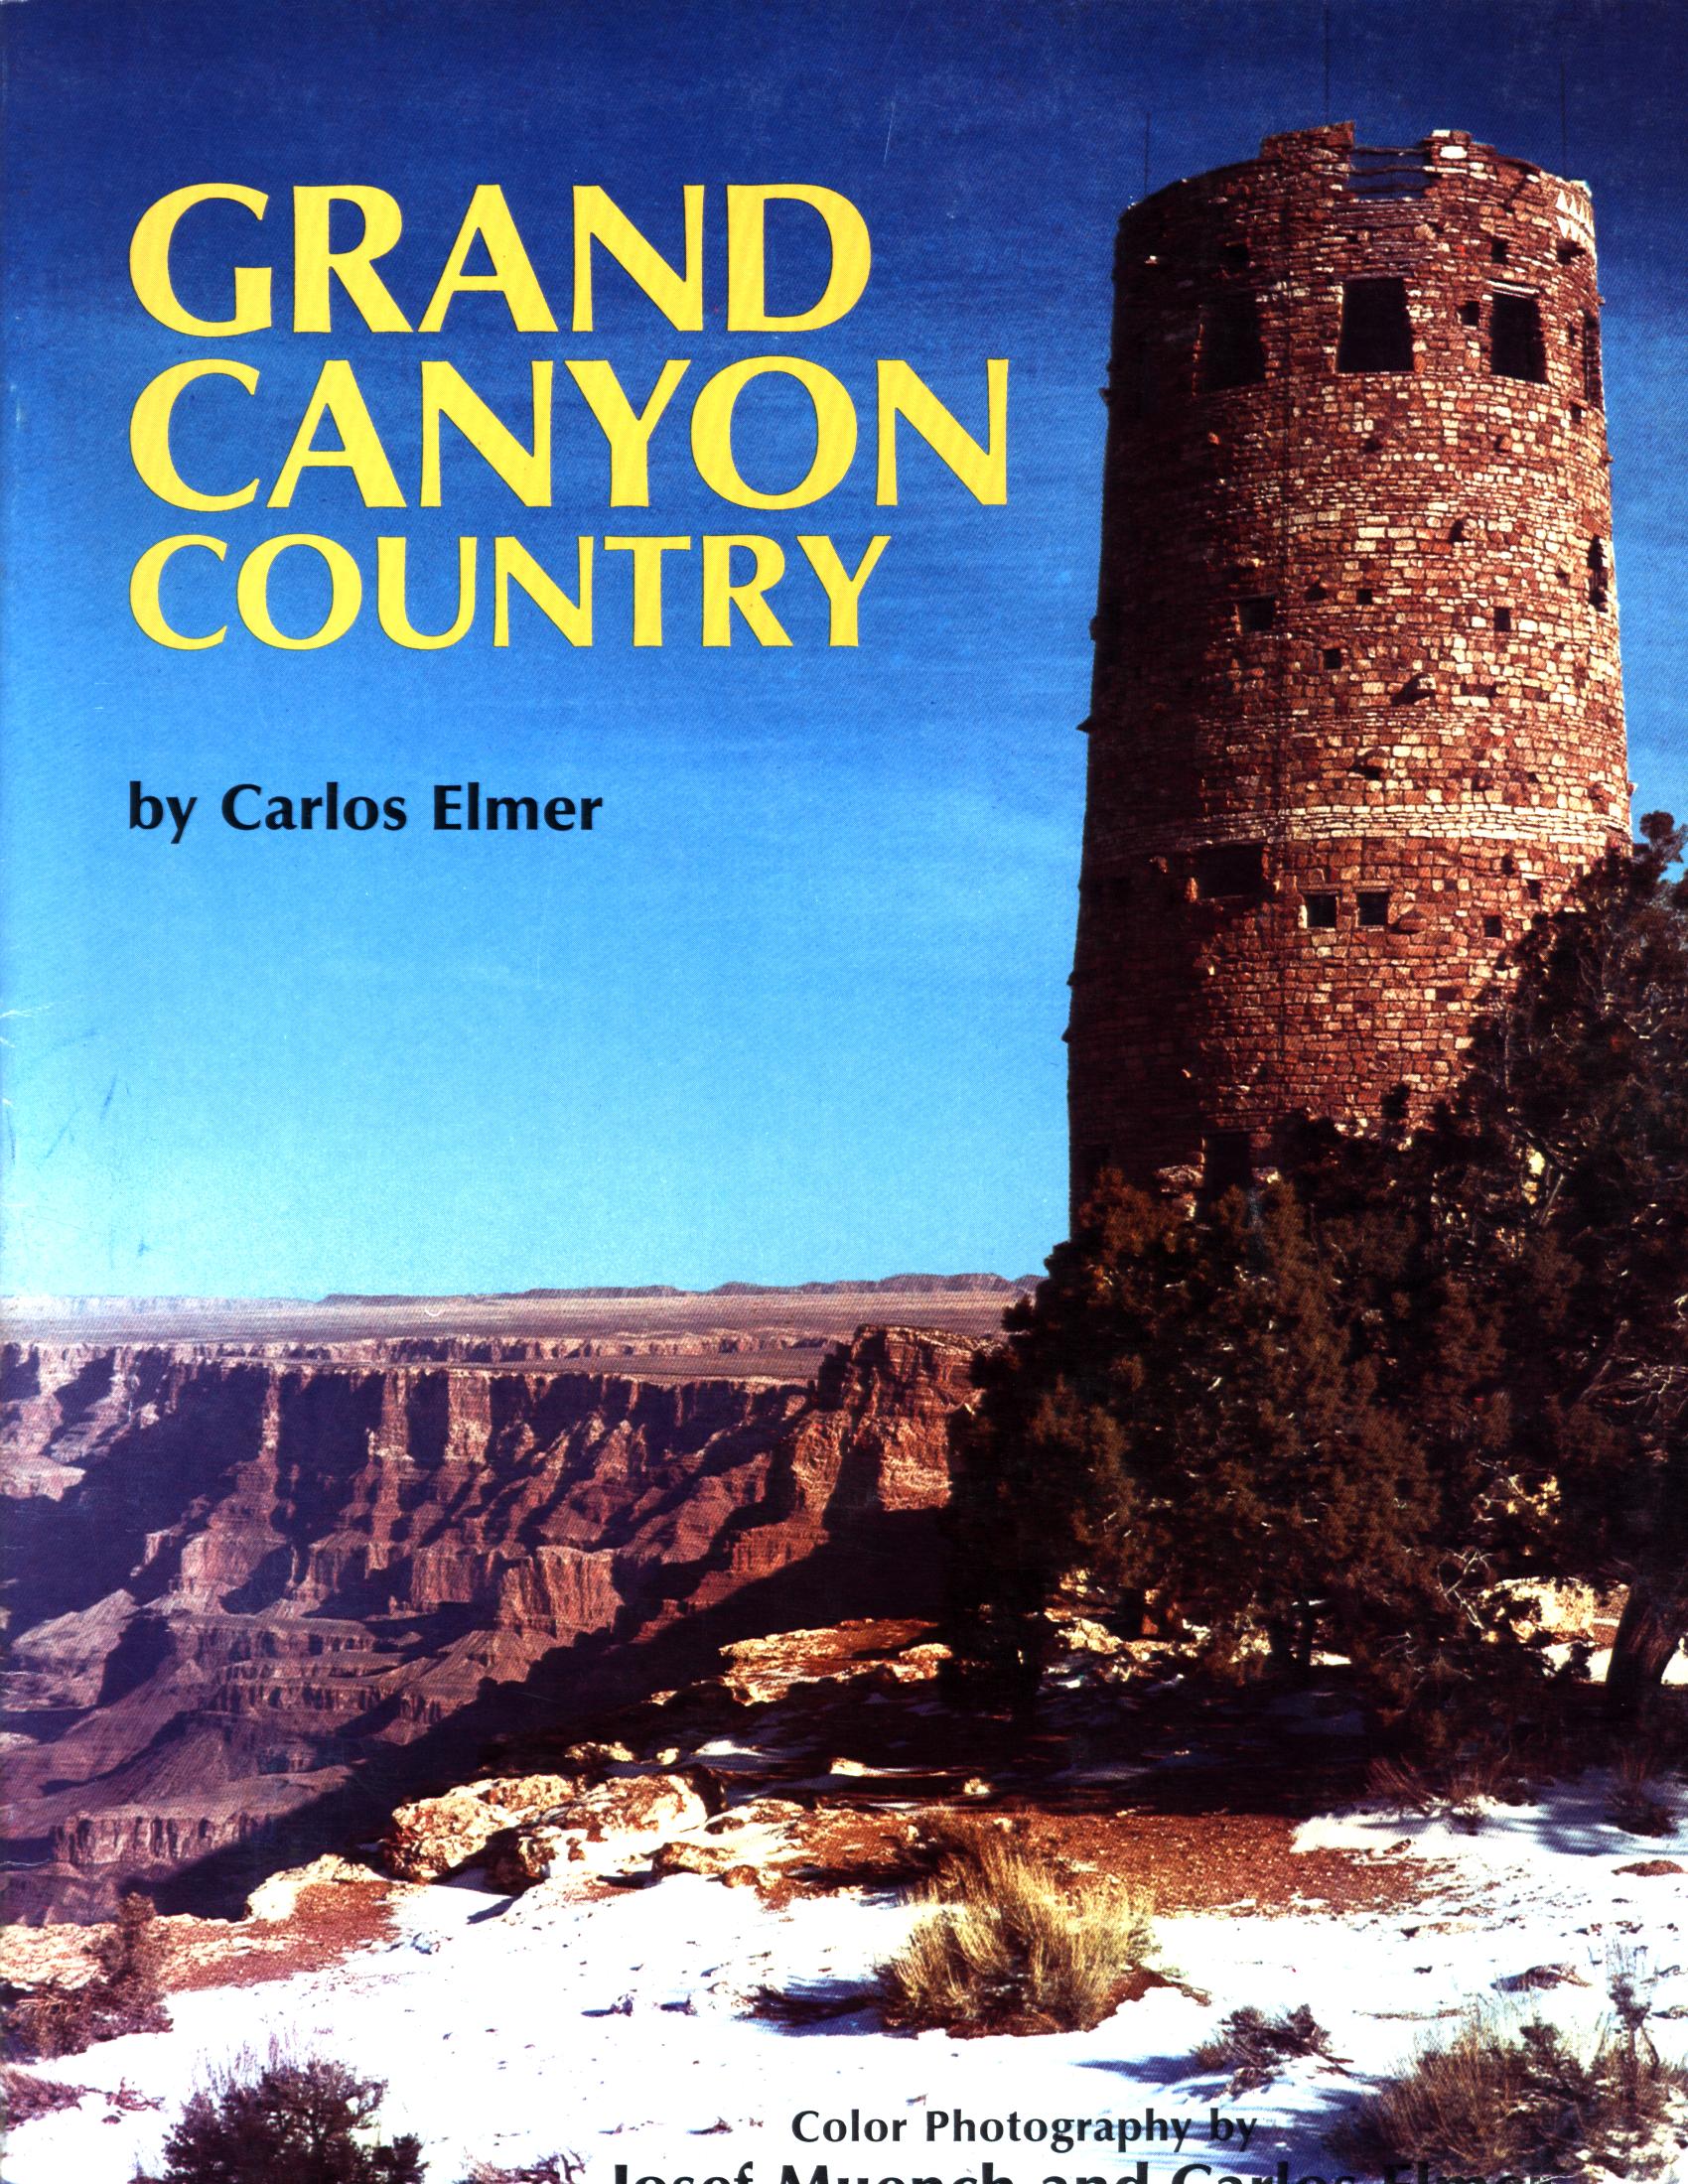 GRAND CANYON COUNTRY. 